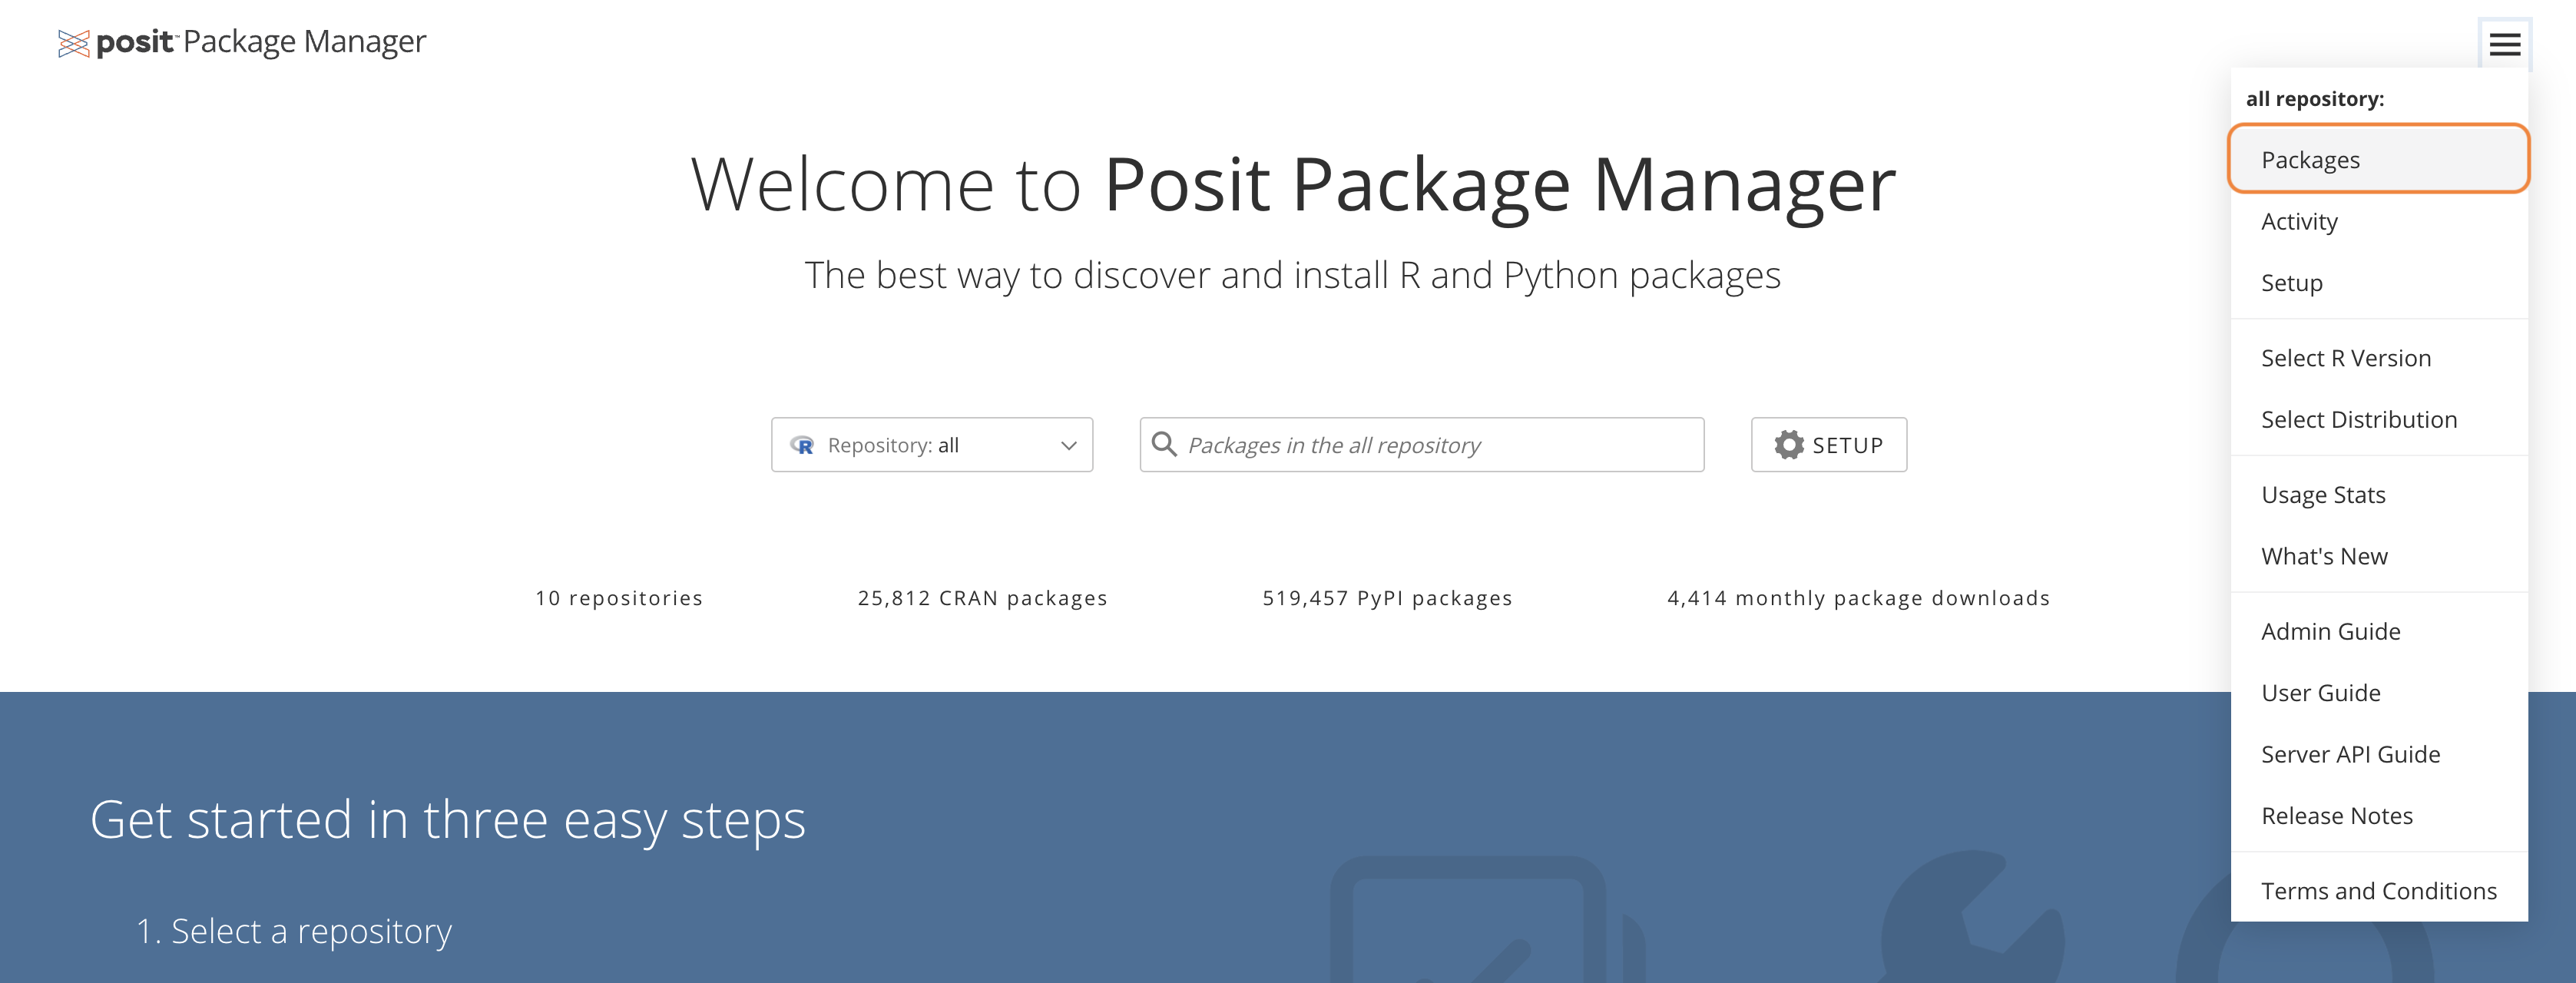 Package Manager menu expanded showing Packages selection highlighted